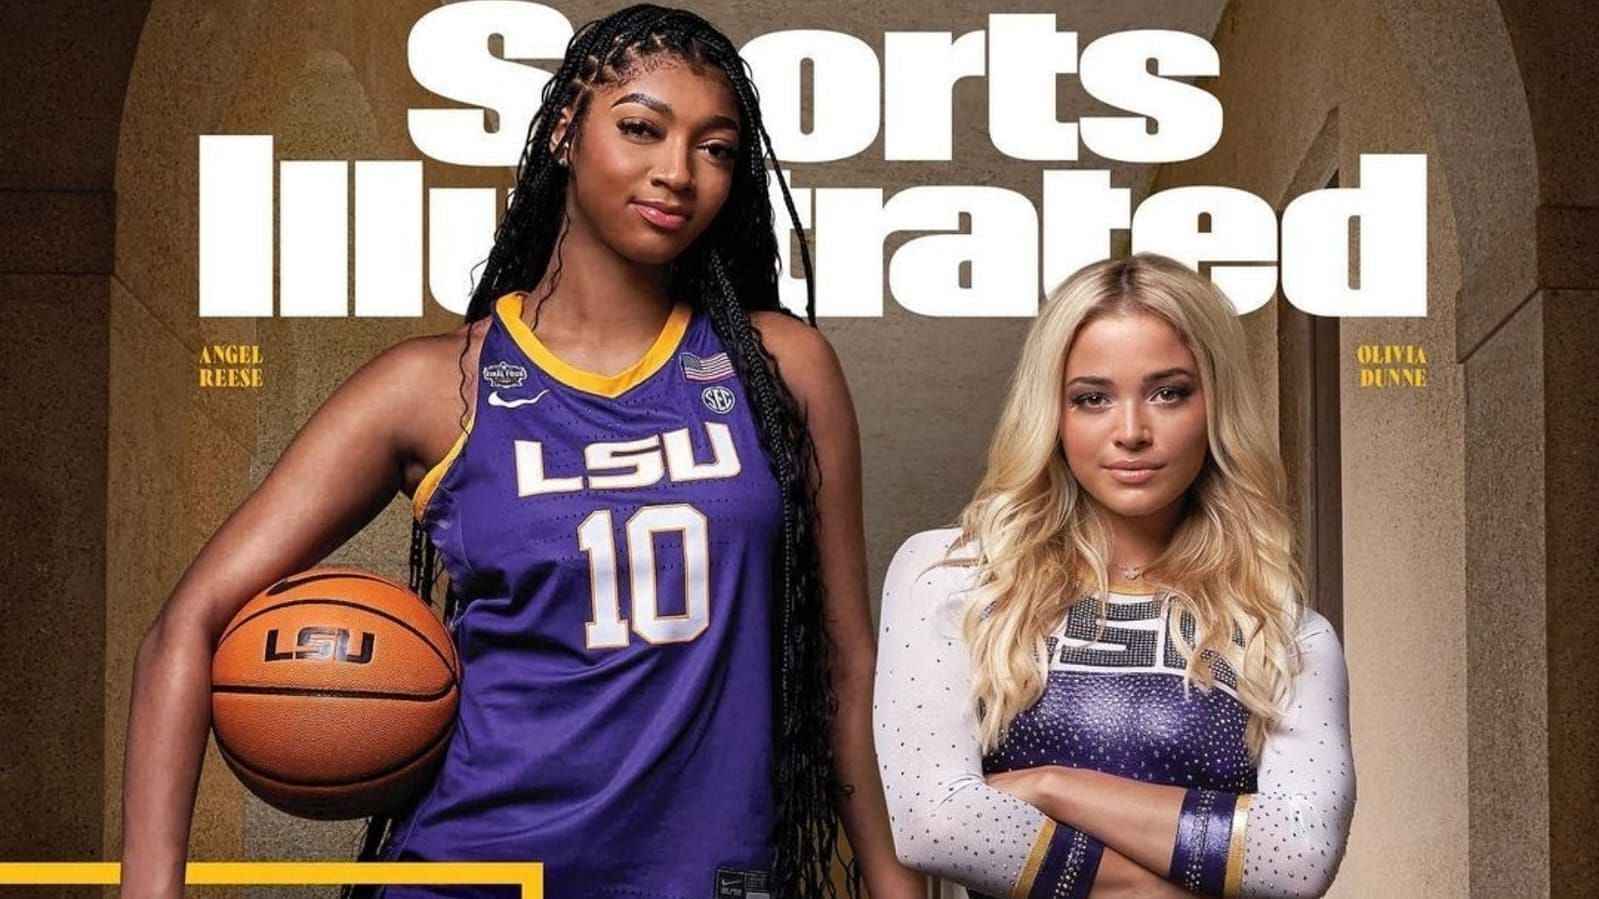 Olivia Dunne and Angel Reese on Sports Illustrated